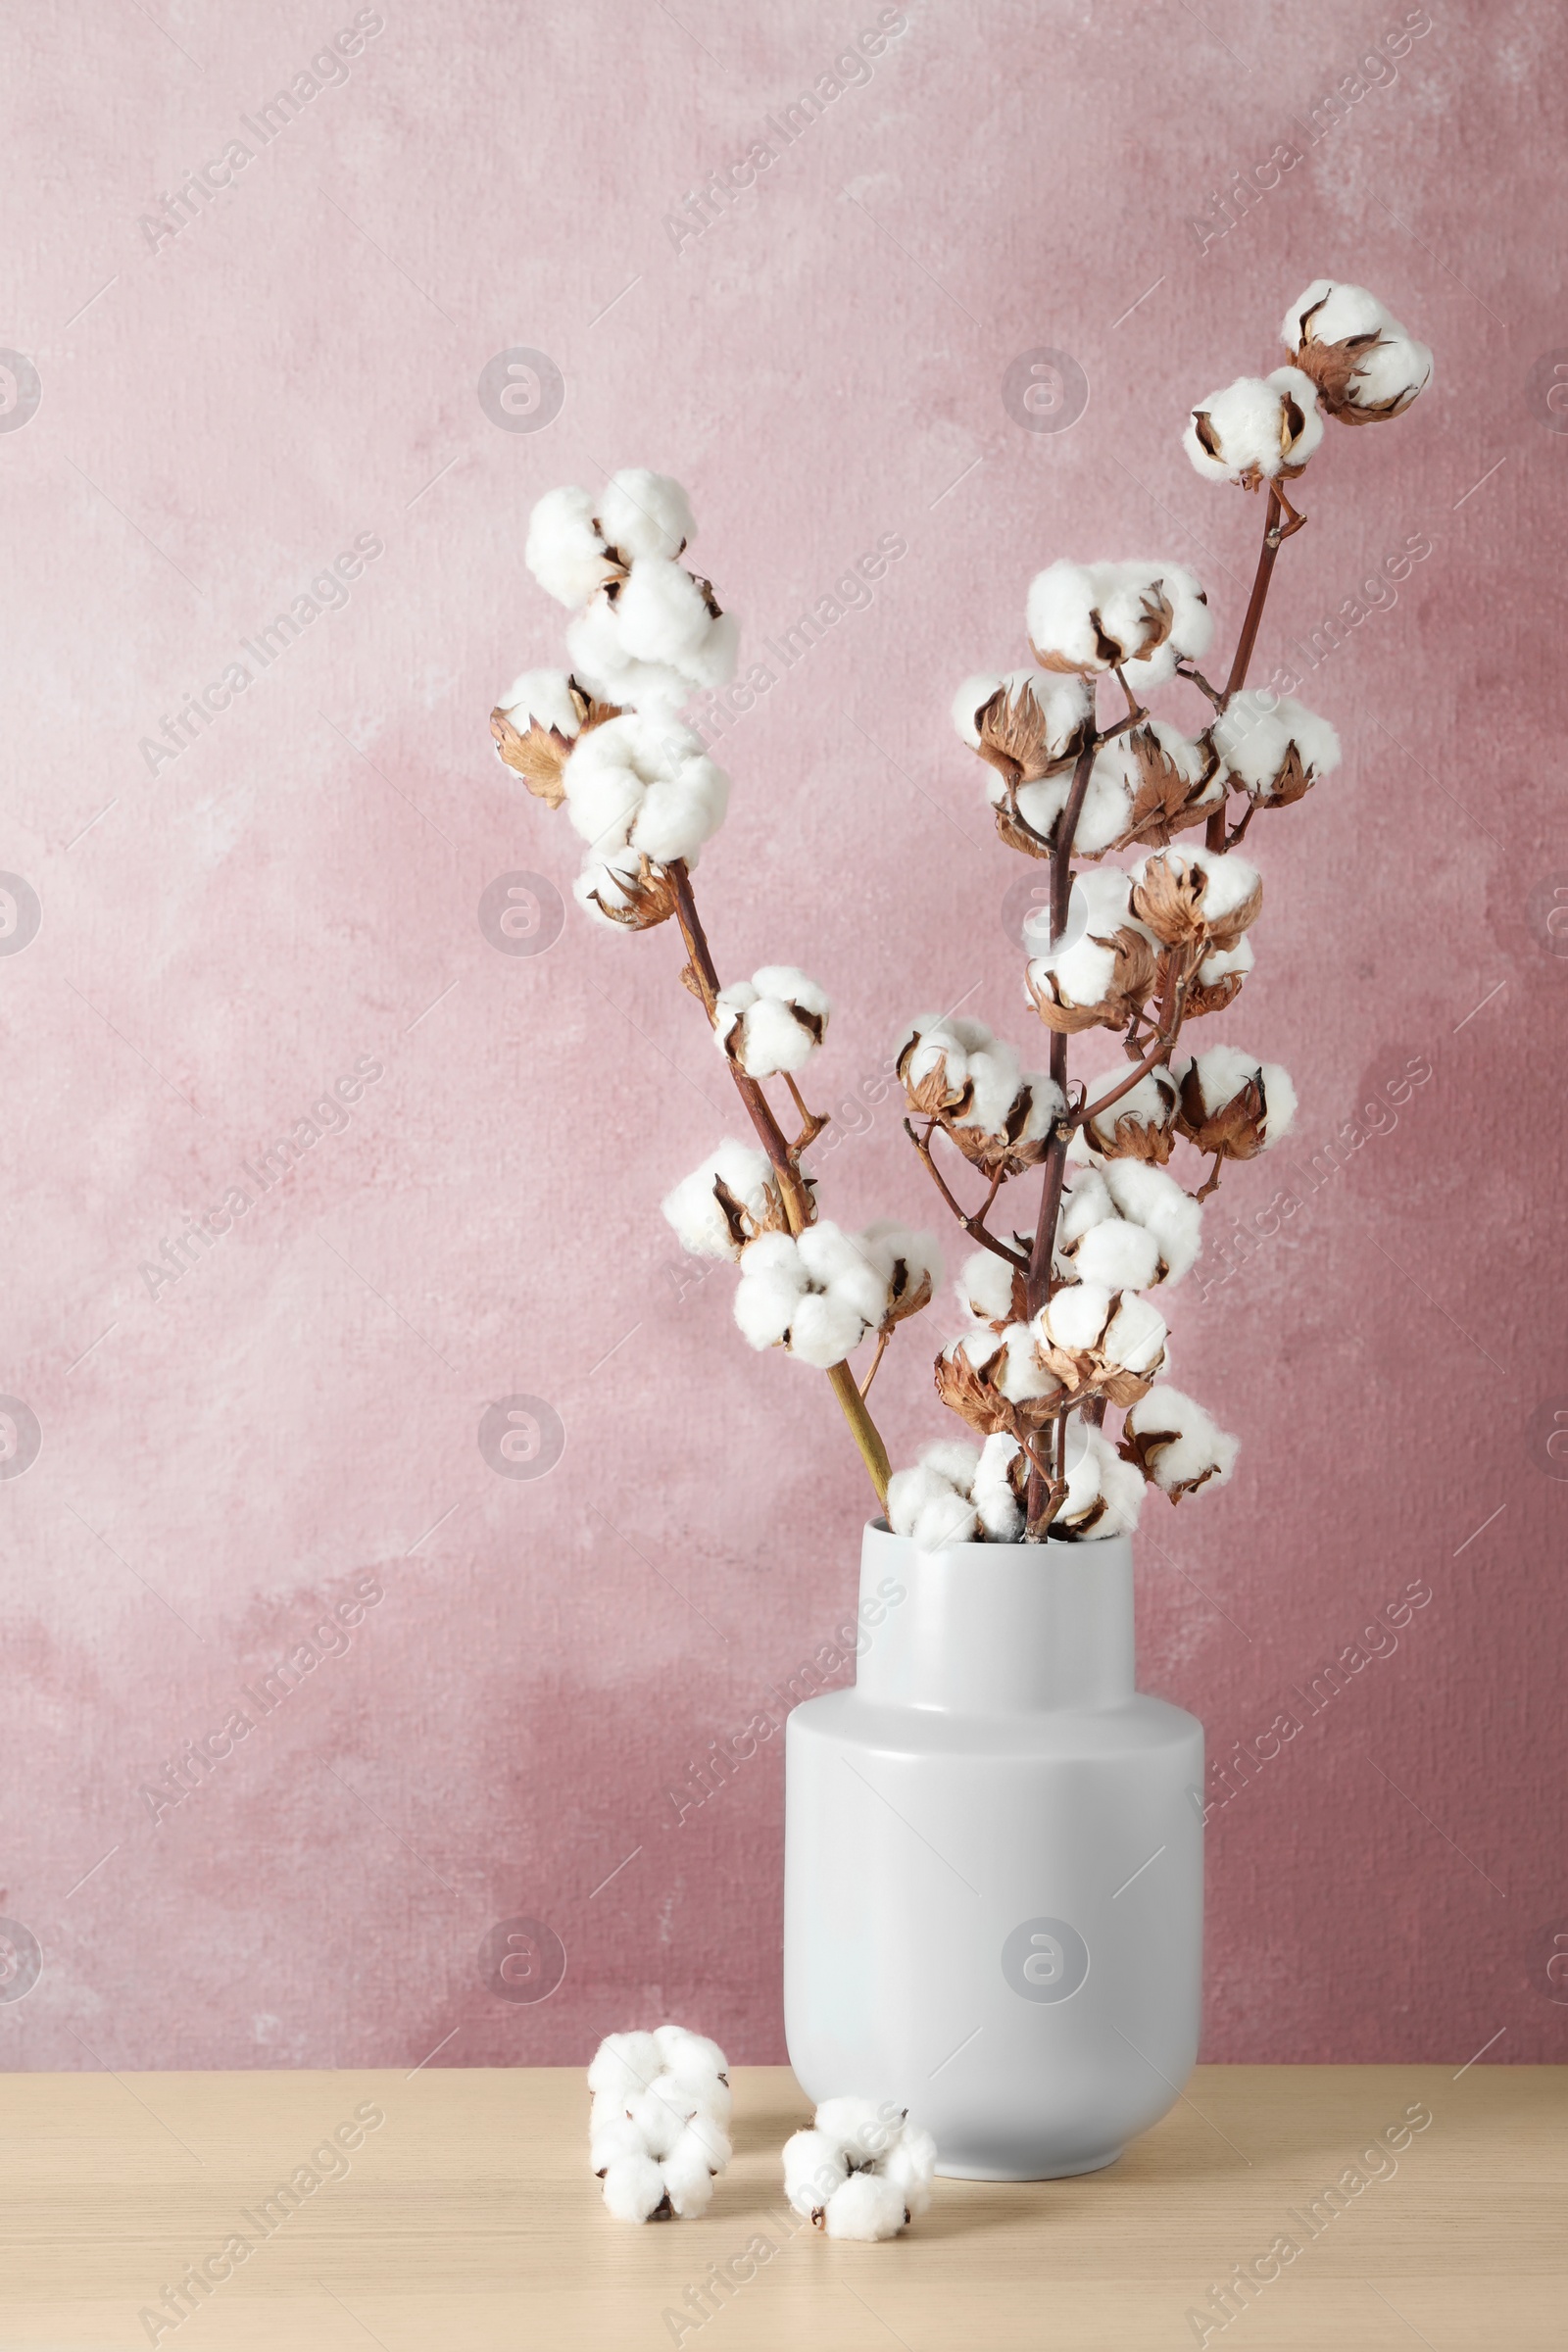 Photo of Beautiful cotton flowers in vase on wooden table against pink background